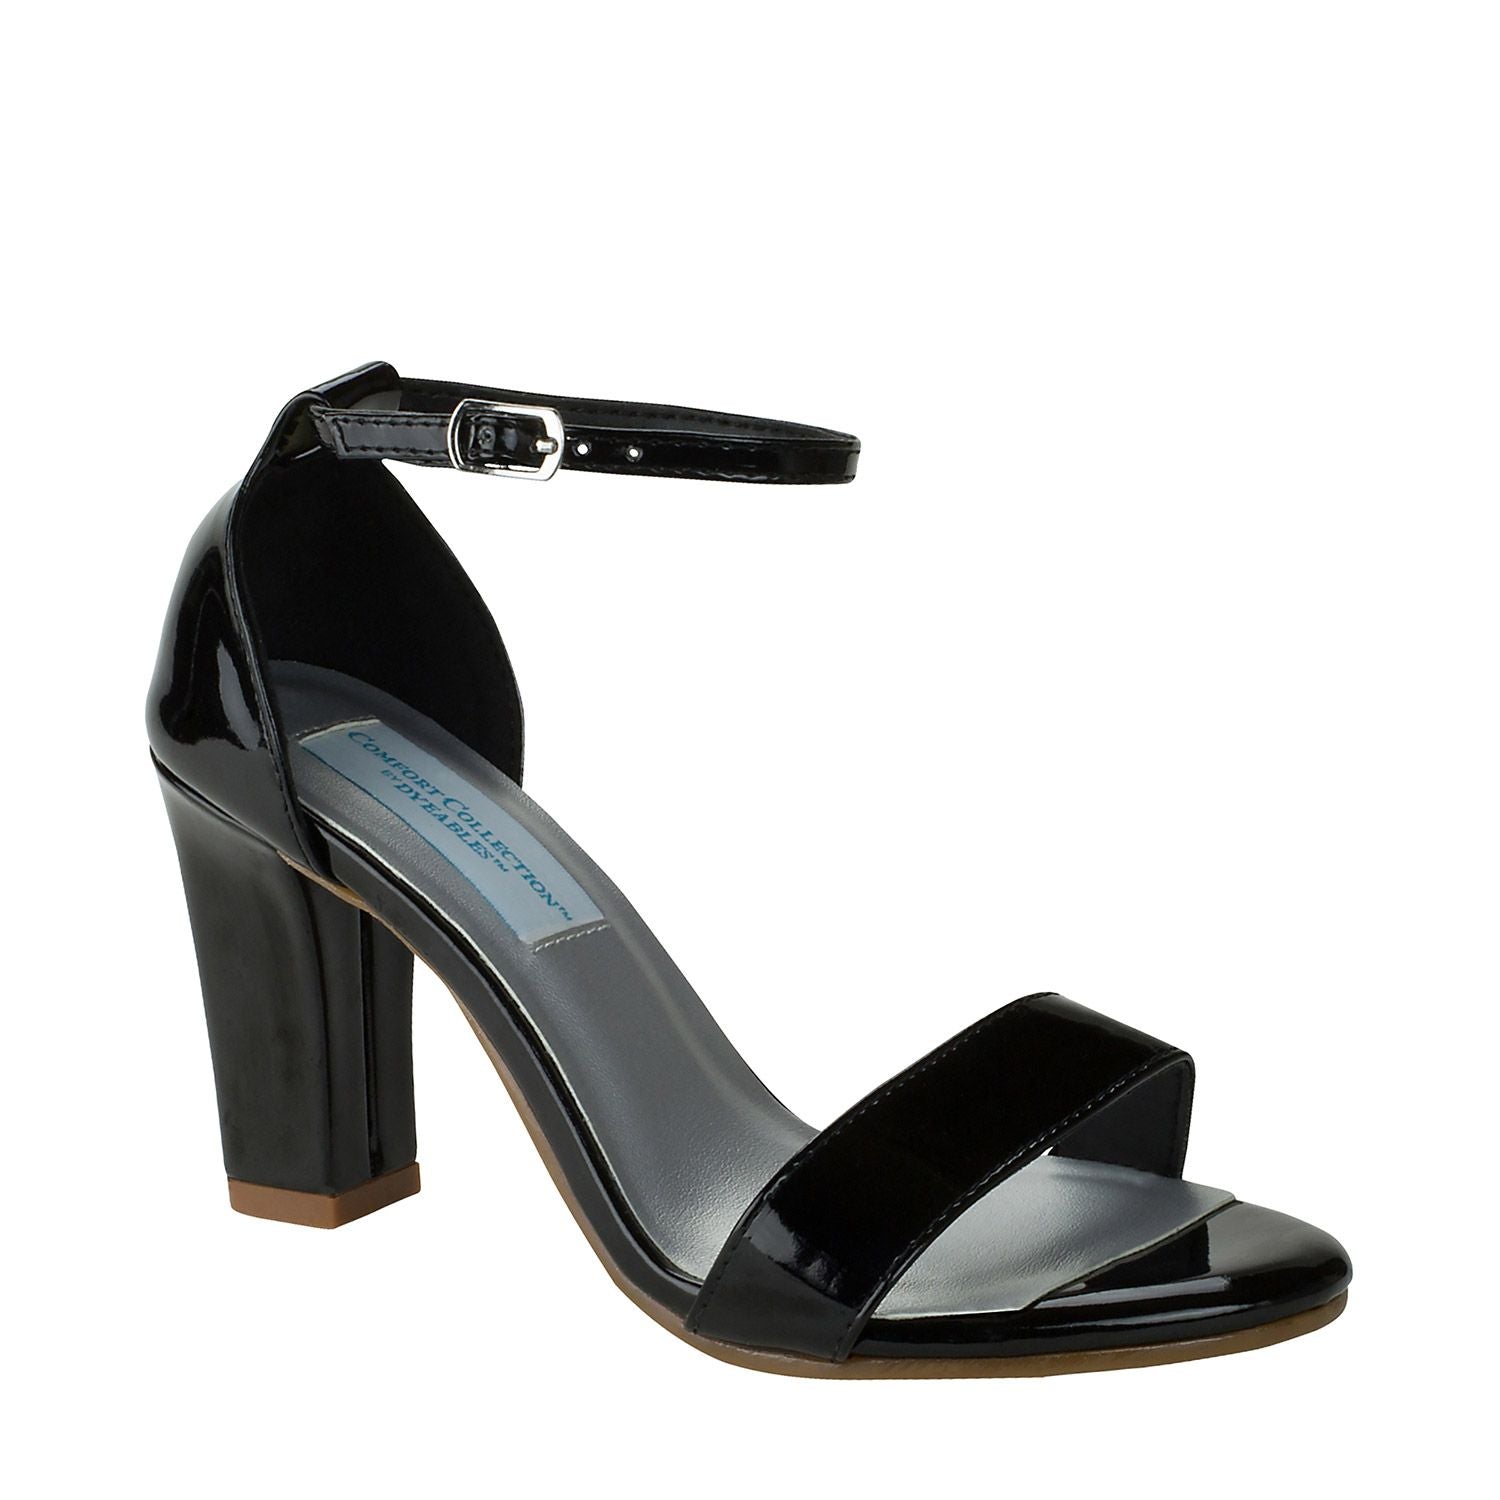 Black open toe shoe with 2.5" heel and ankle strap